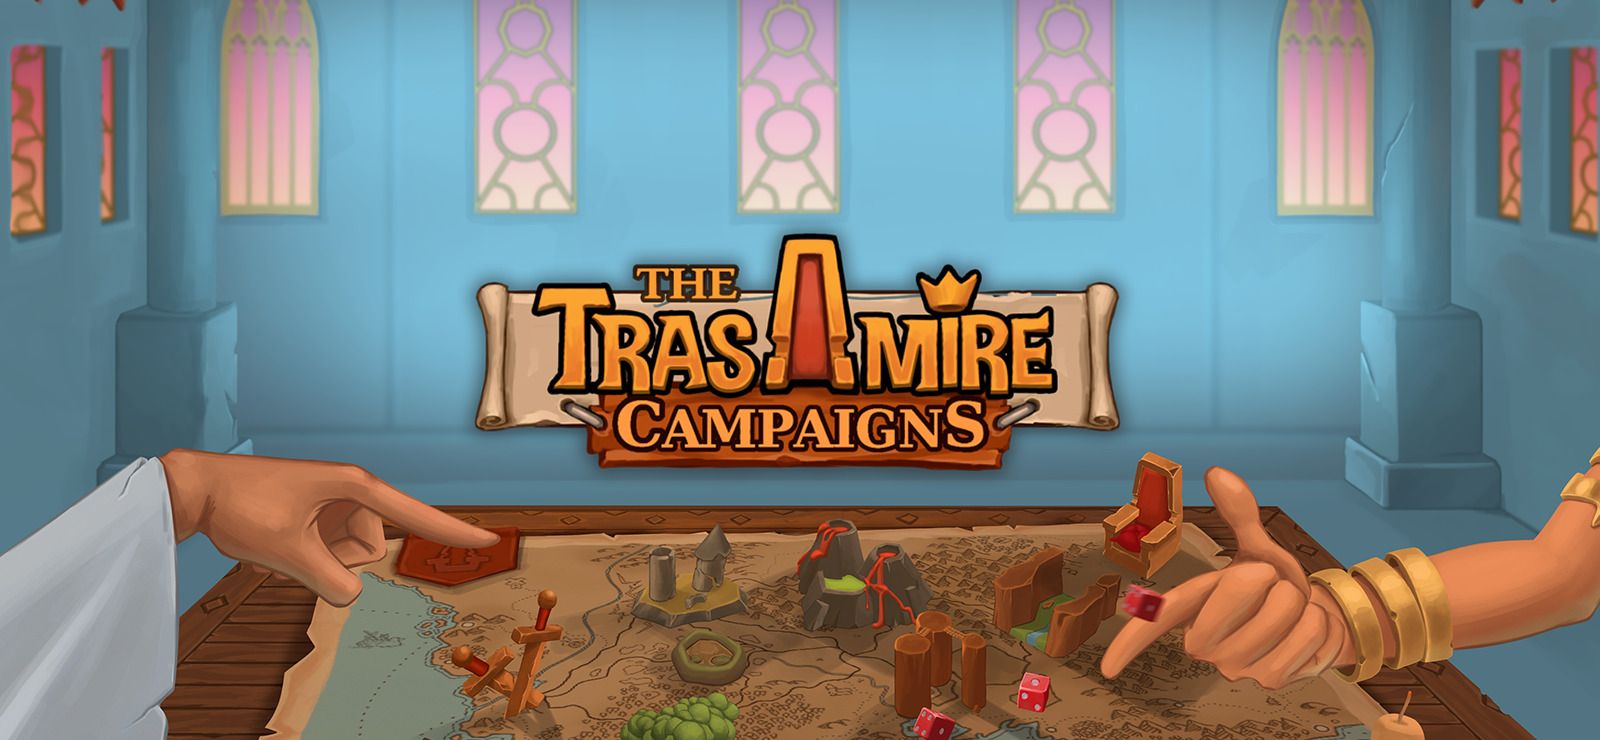 The Trasamire Campaigns: Risk It All for the Throne